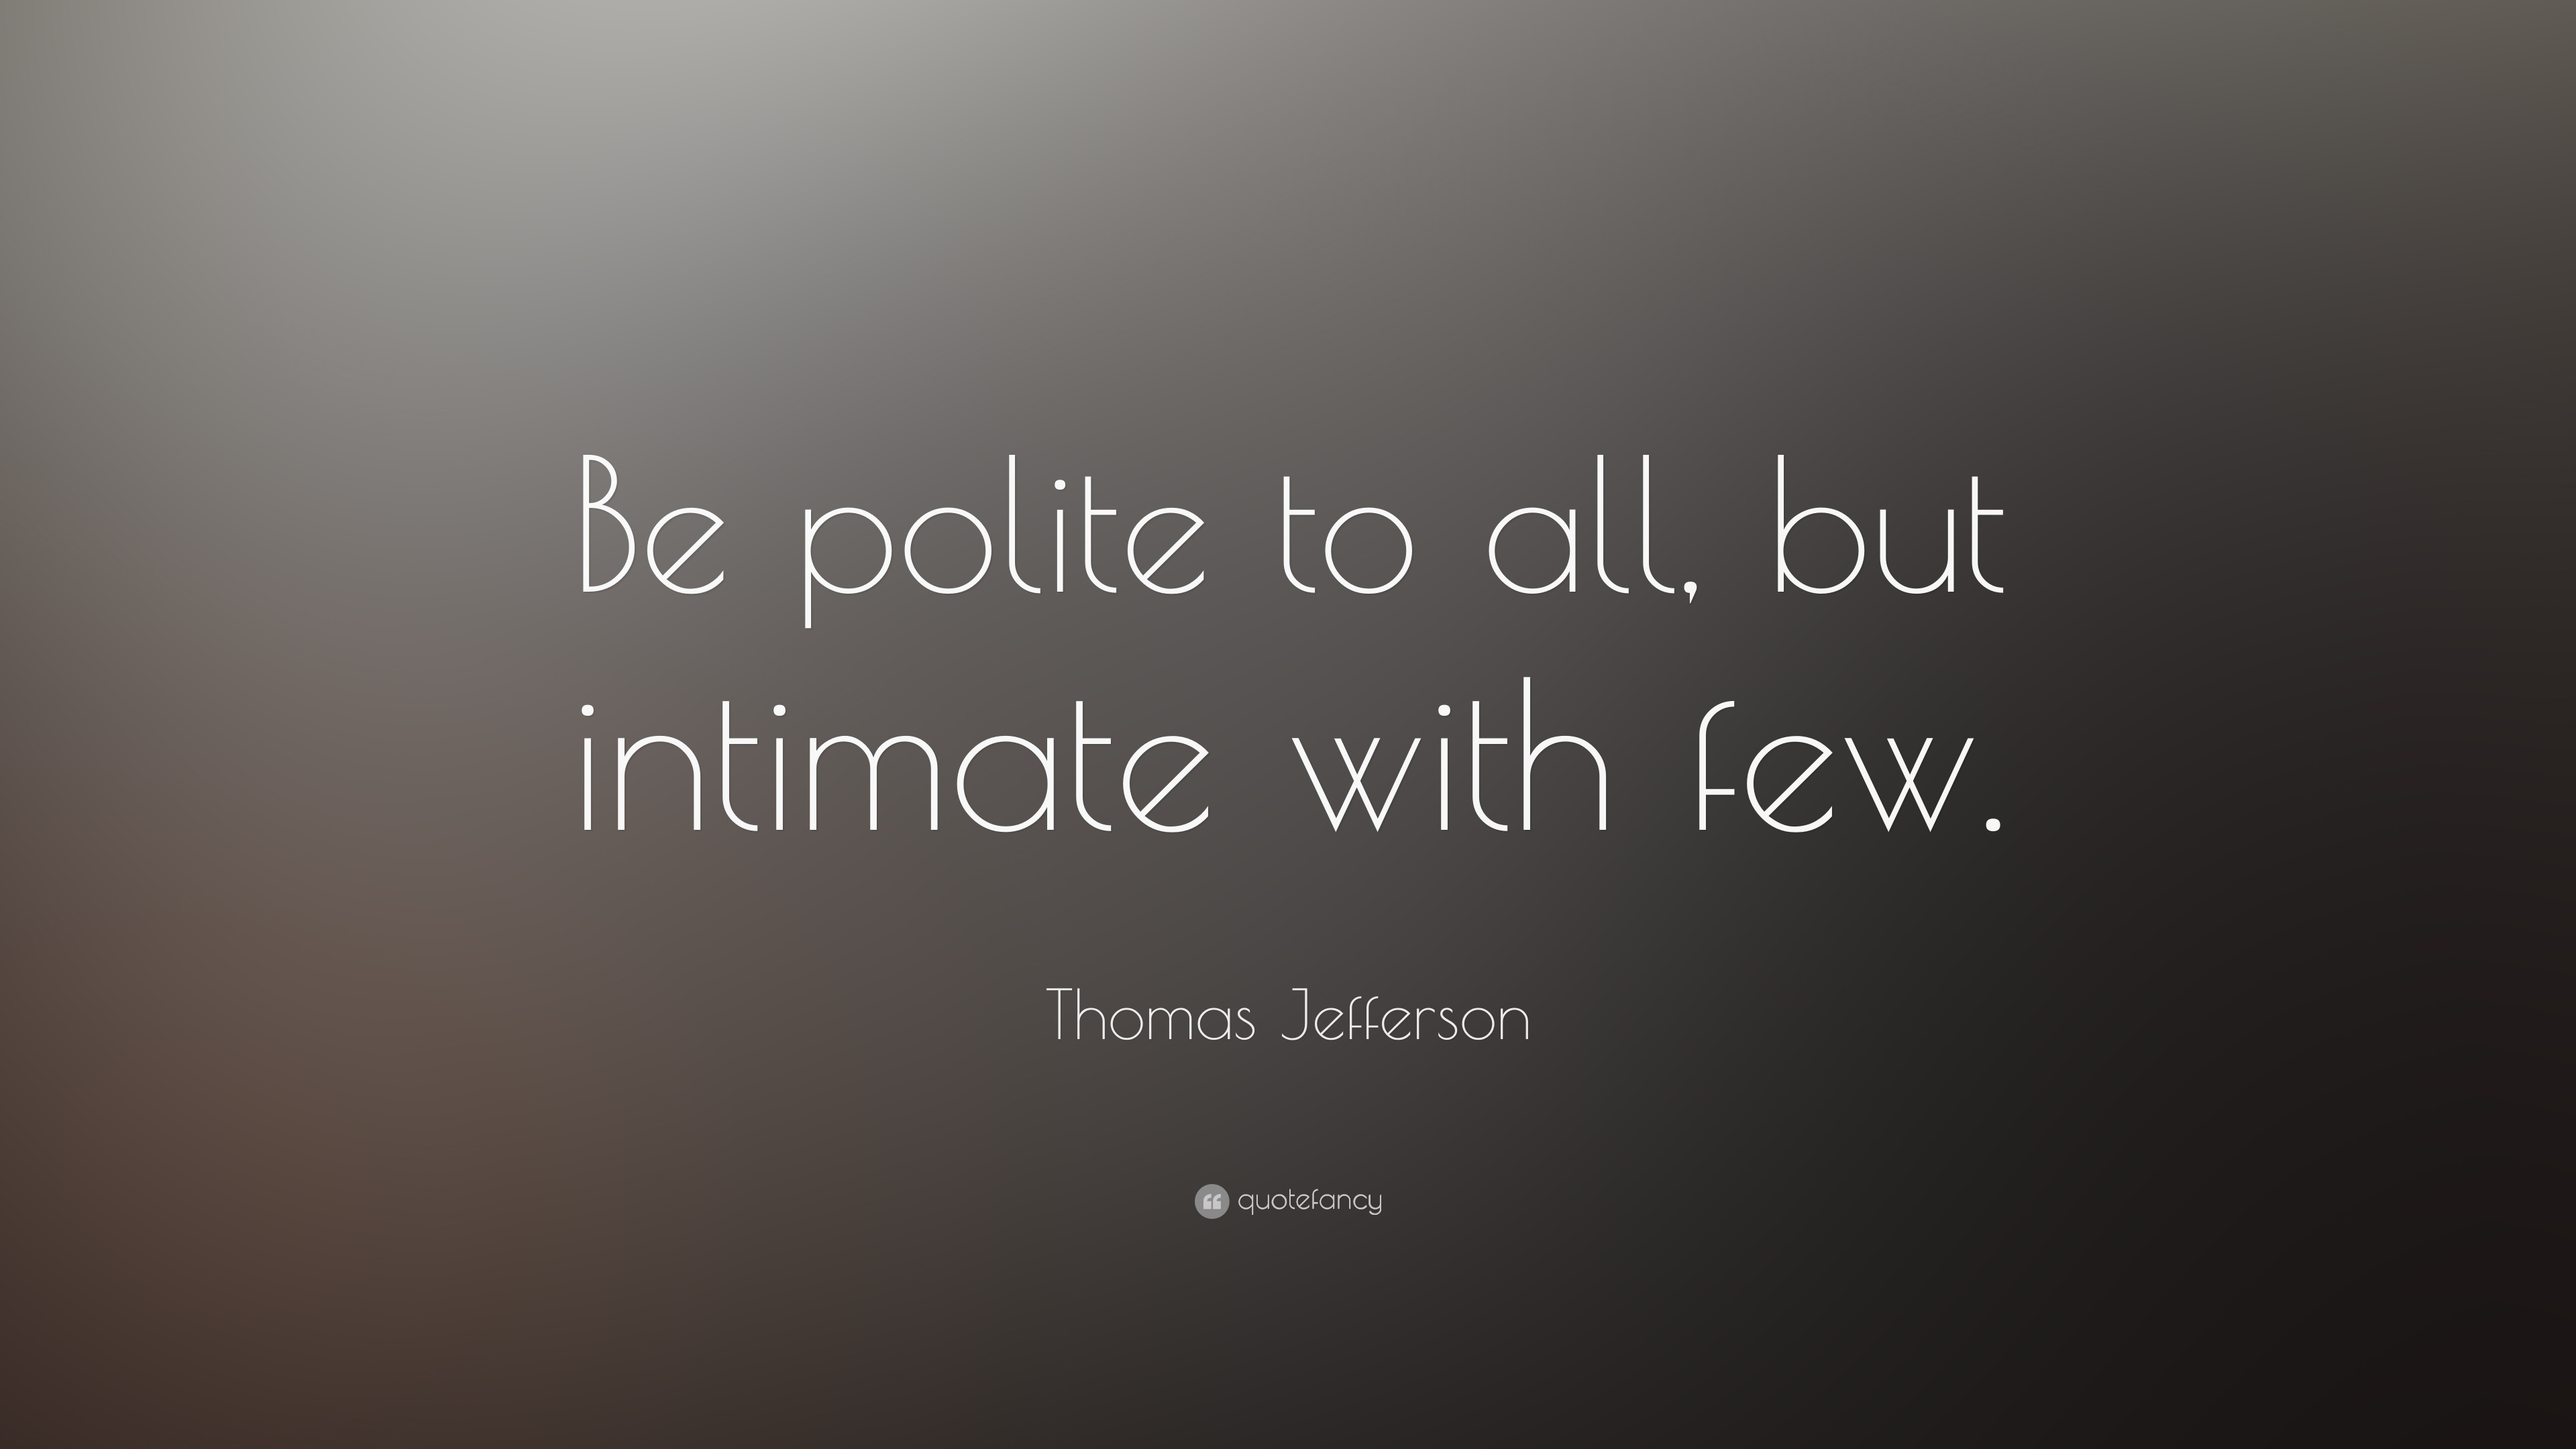 Thomas Jefferson Quote: “Be polite to all, but intimate with few ...